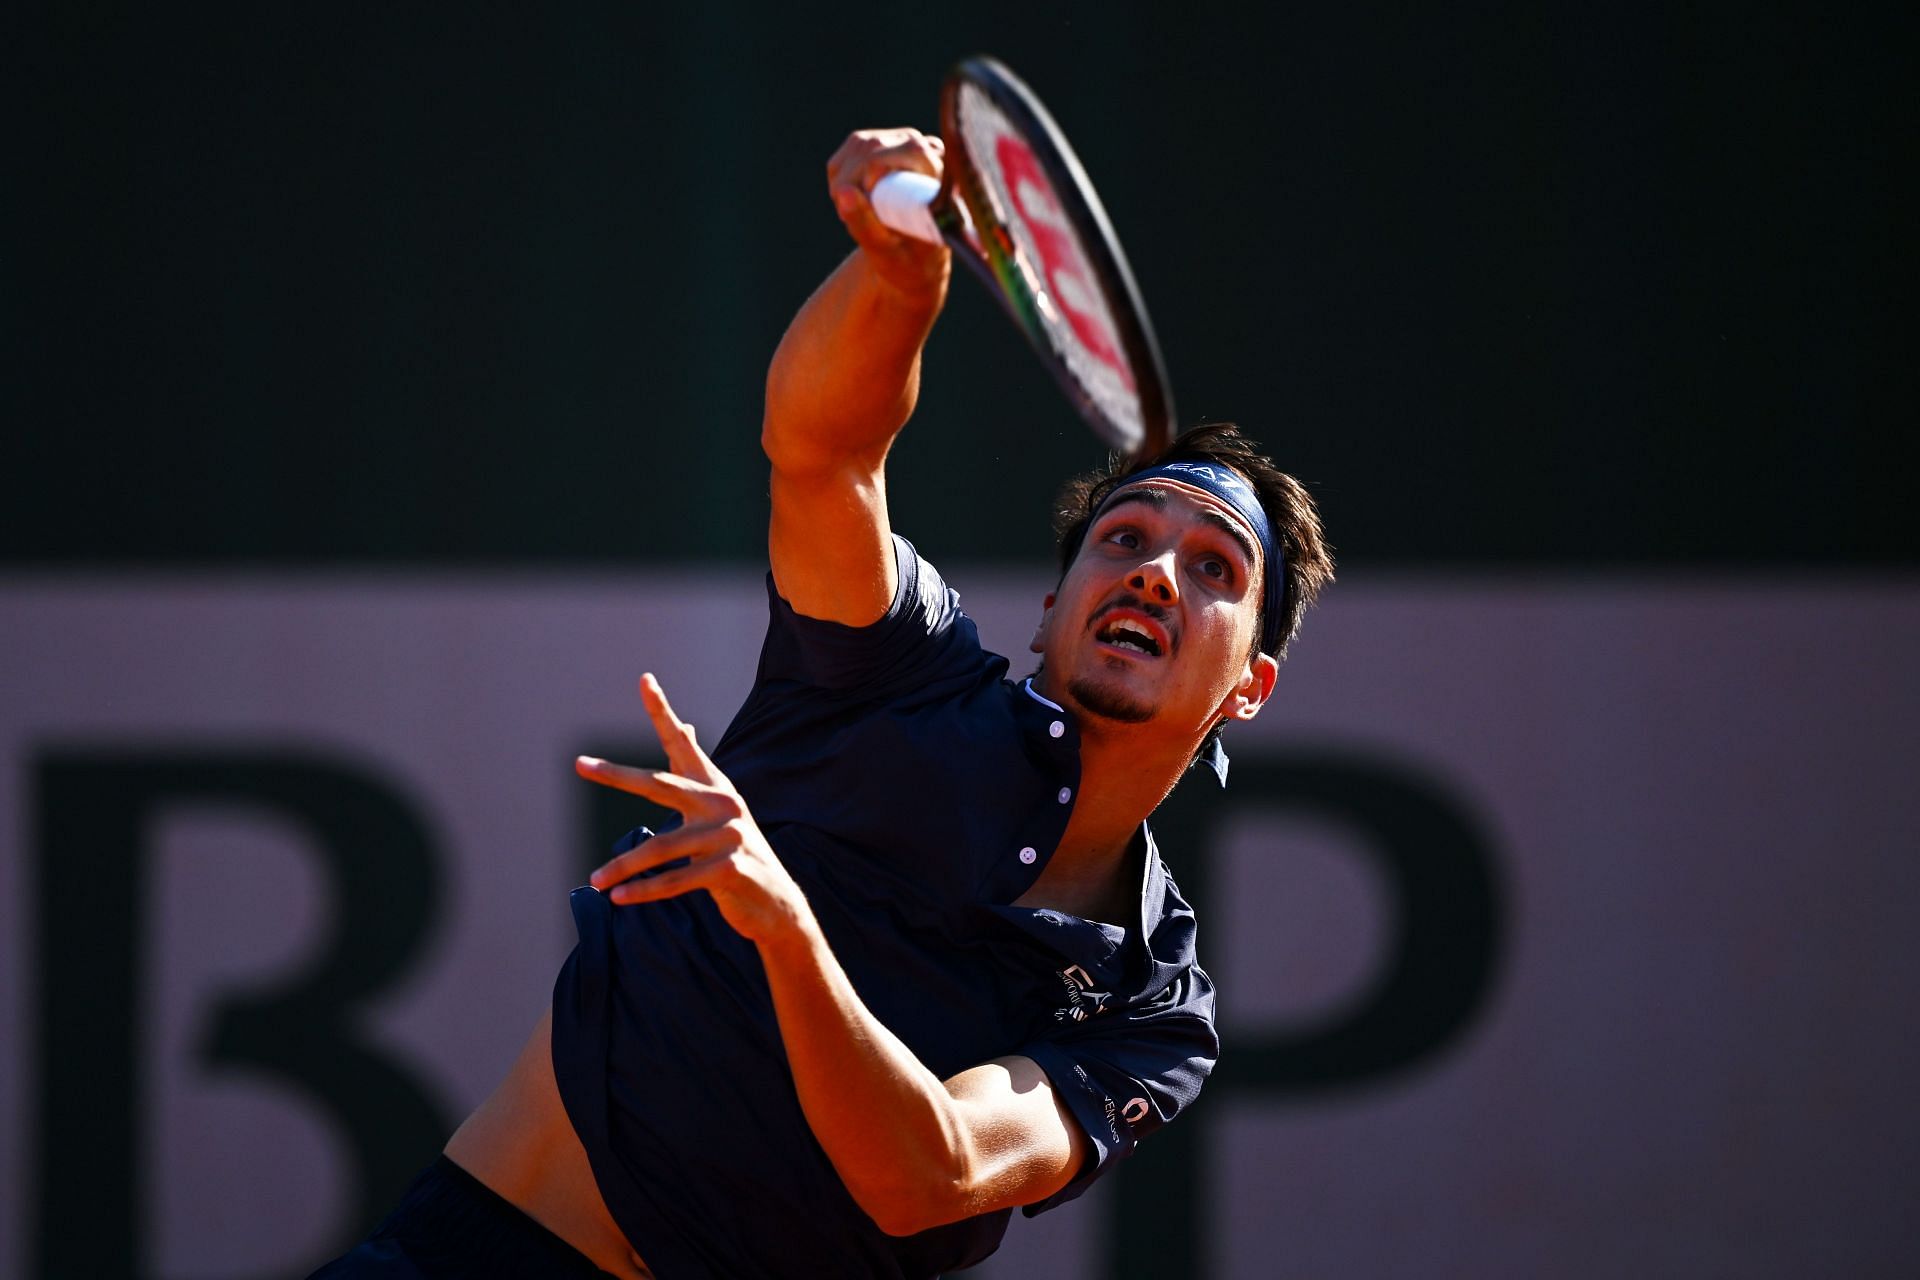 Sonego is looking to reach the fourth round at Roland Garros.